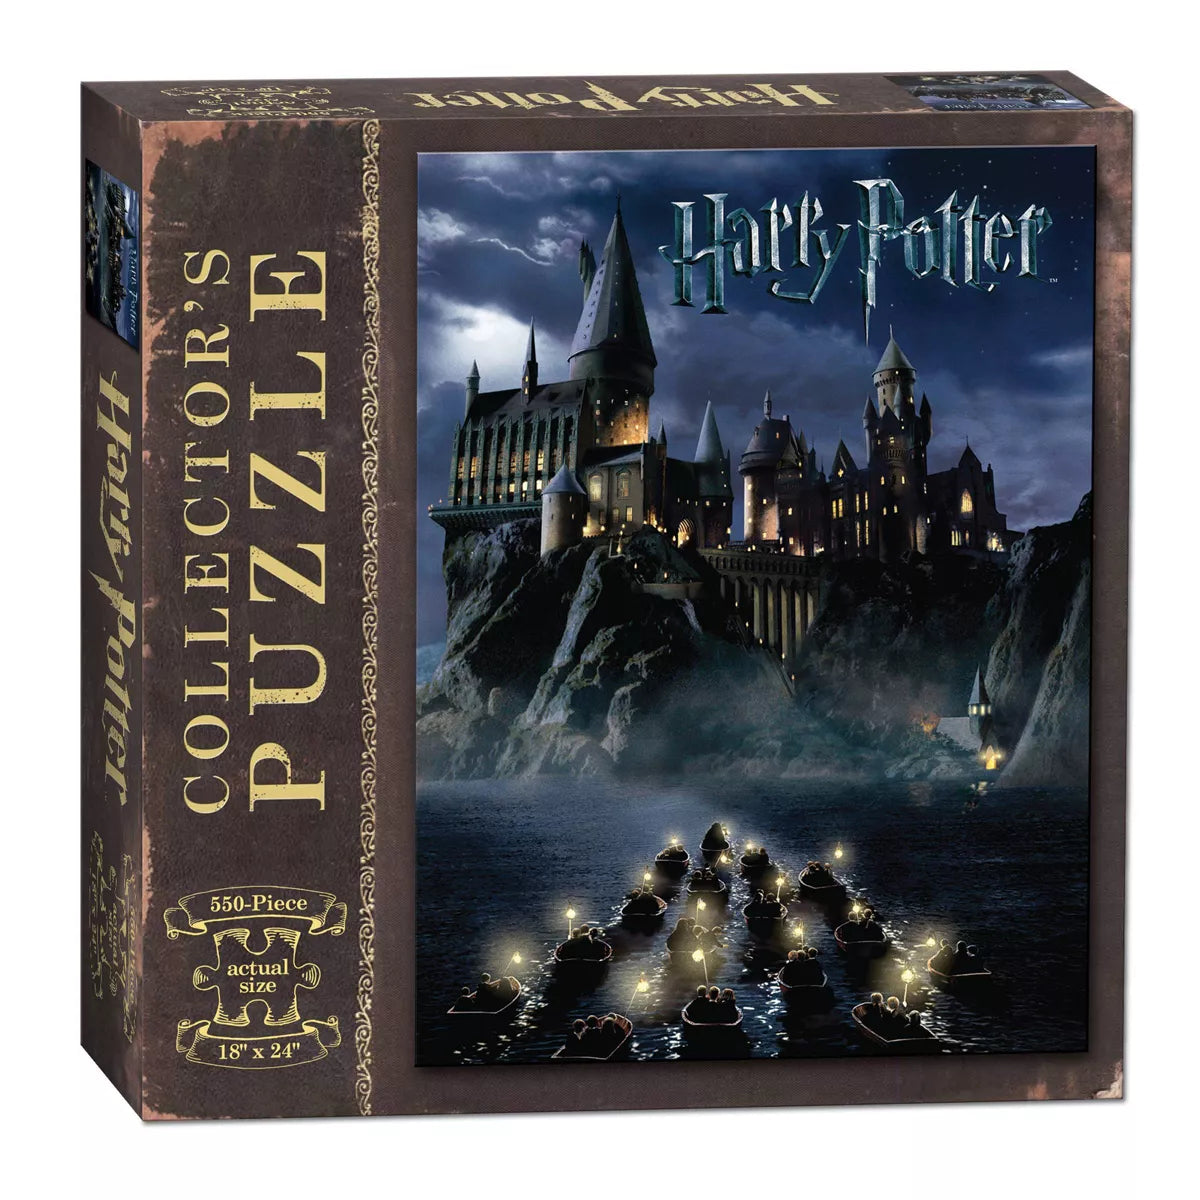 Collector's Puzzle: Harry Potter 550-piece